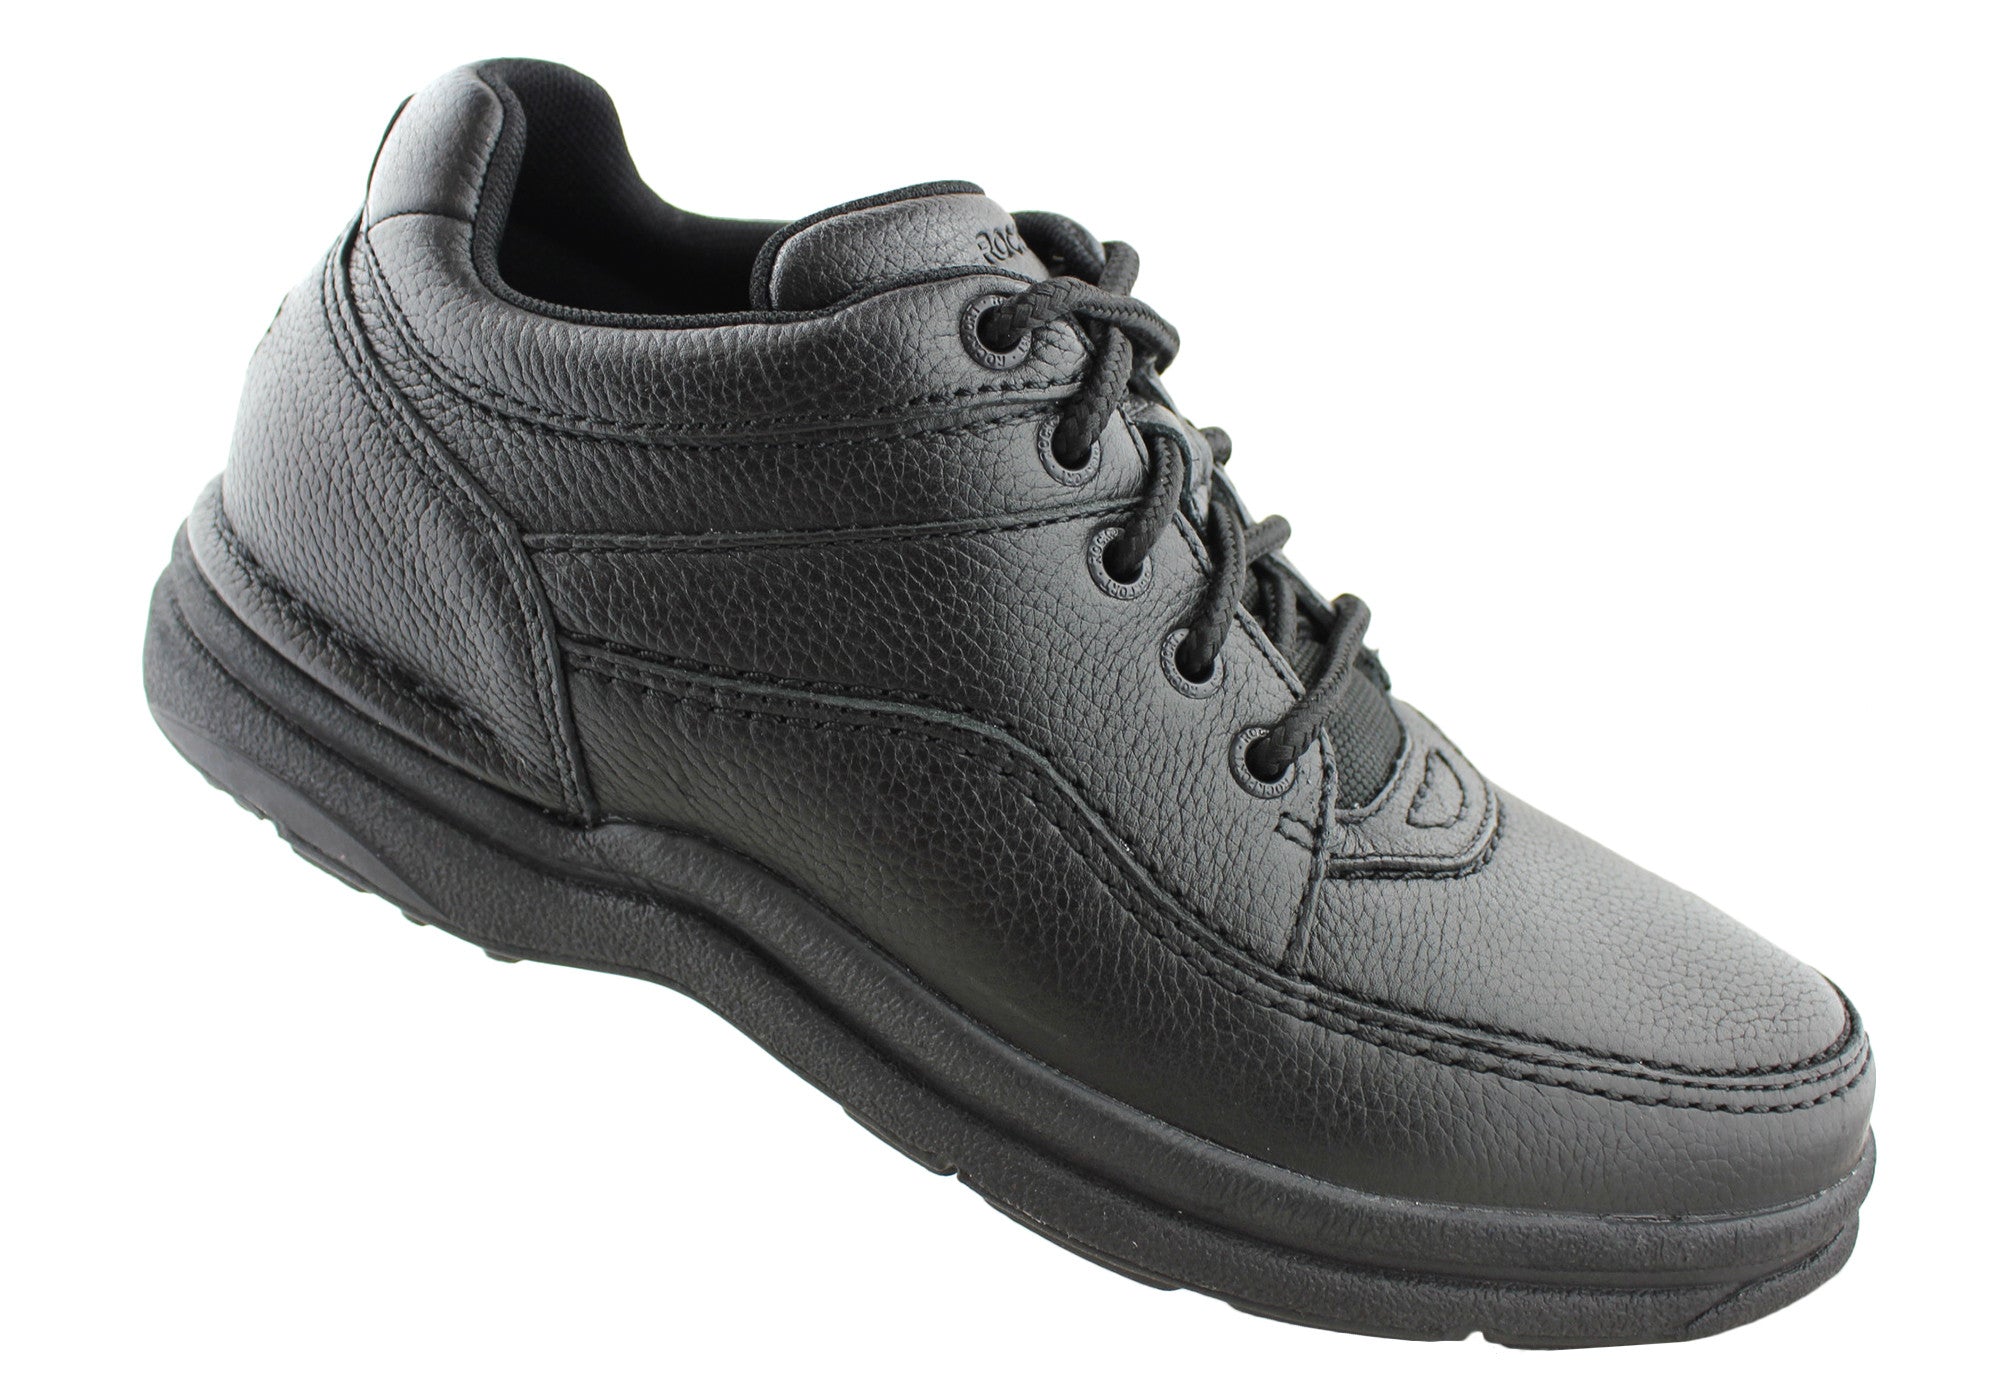 rockport classic world tour walking shoes